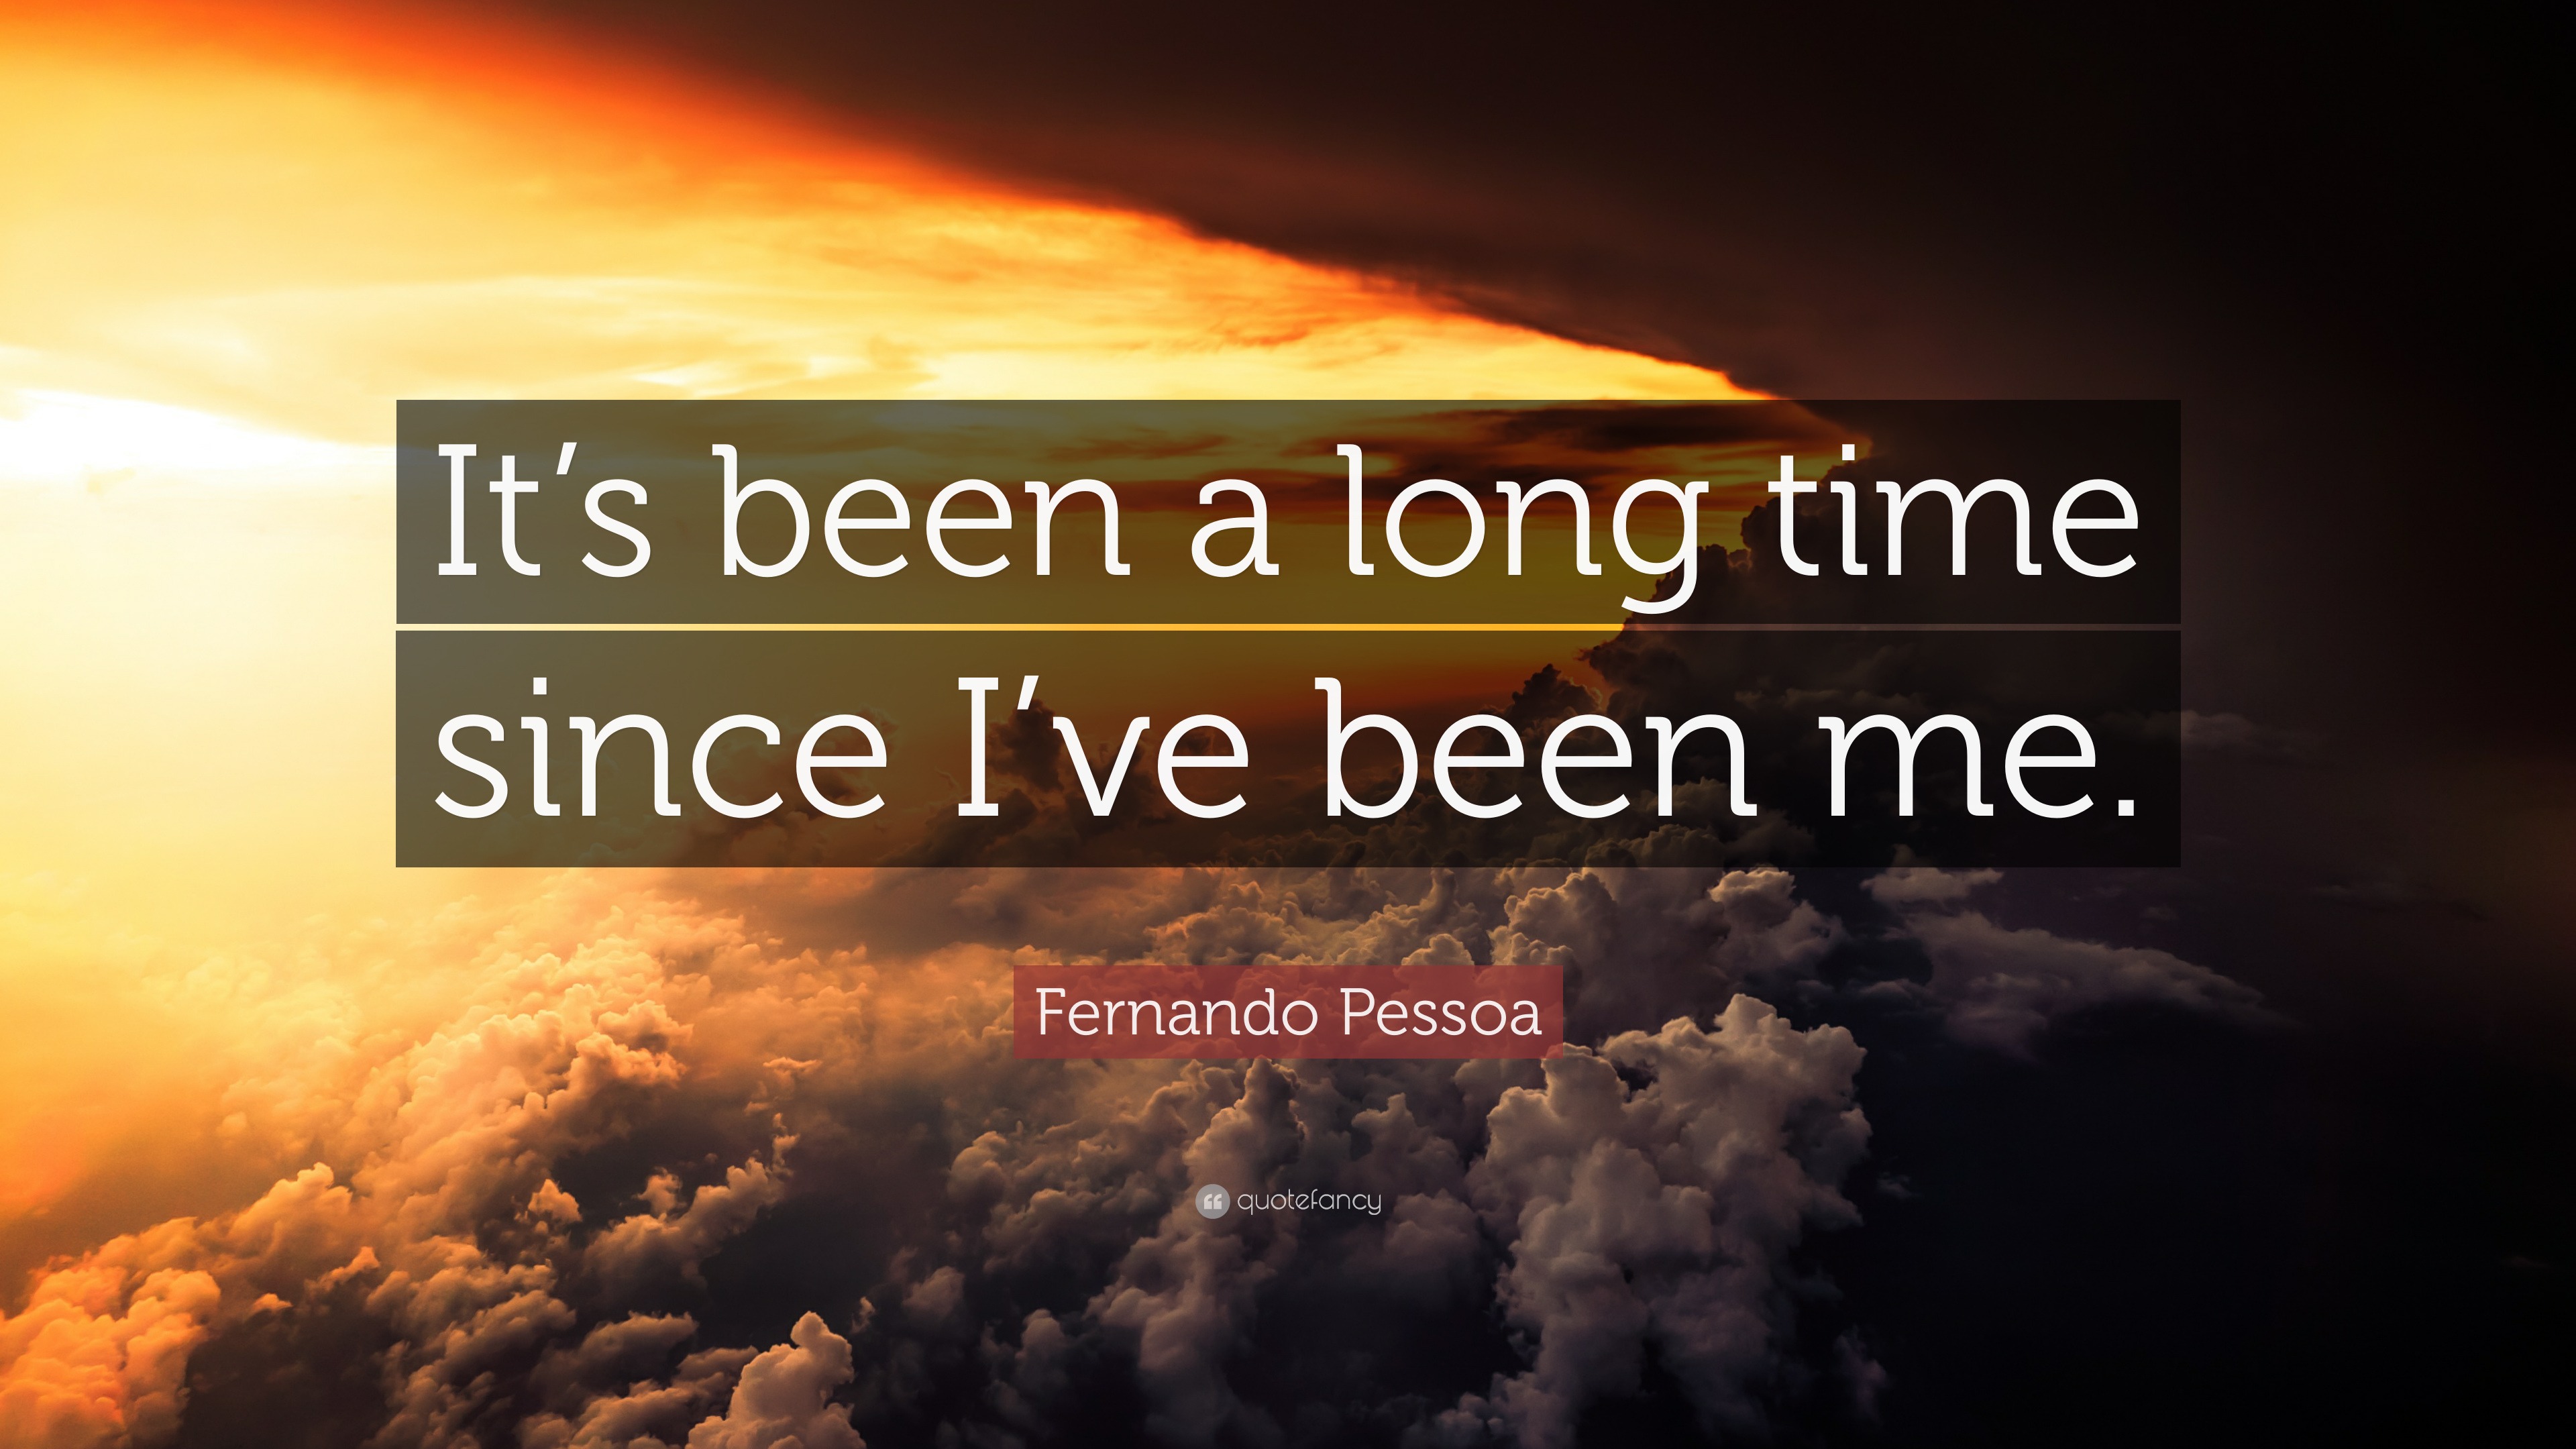 Fernando Pessoa Quote: “It's been a long time since I've been me.”